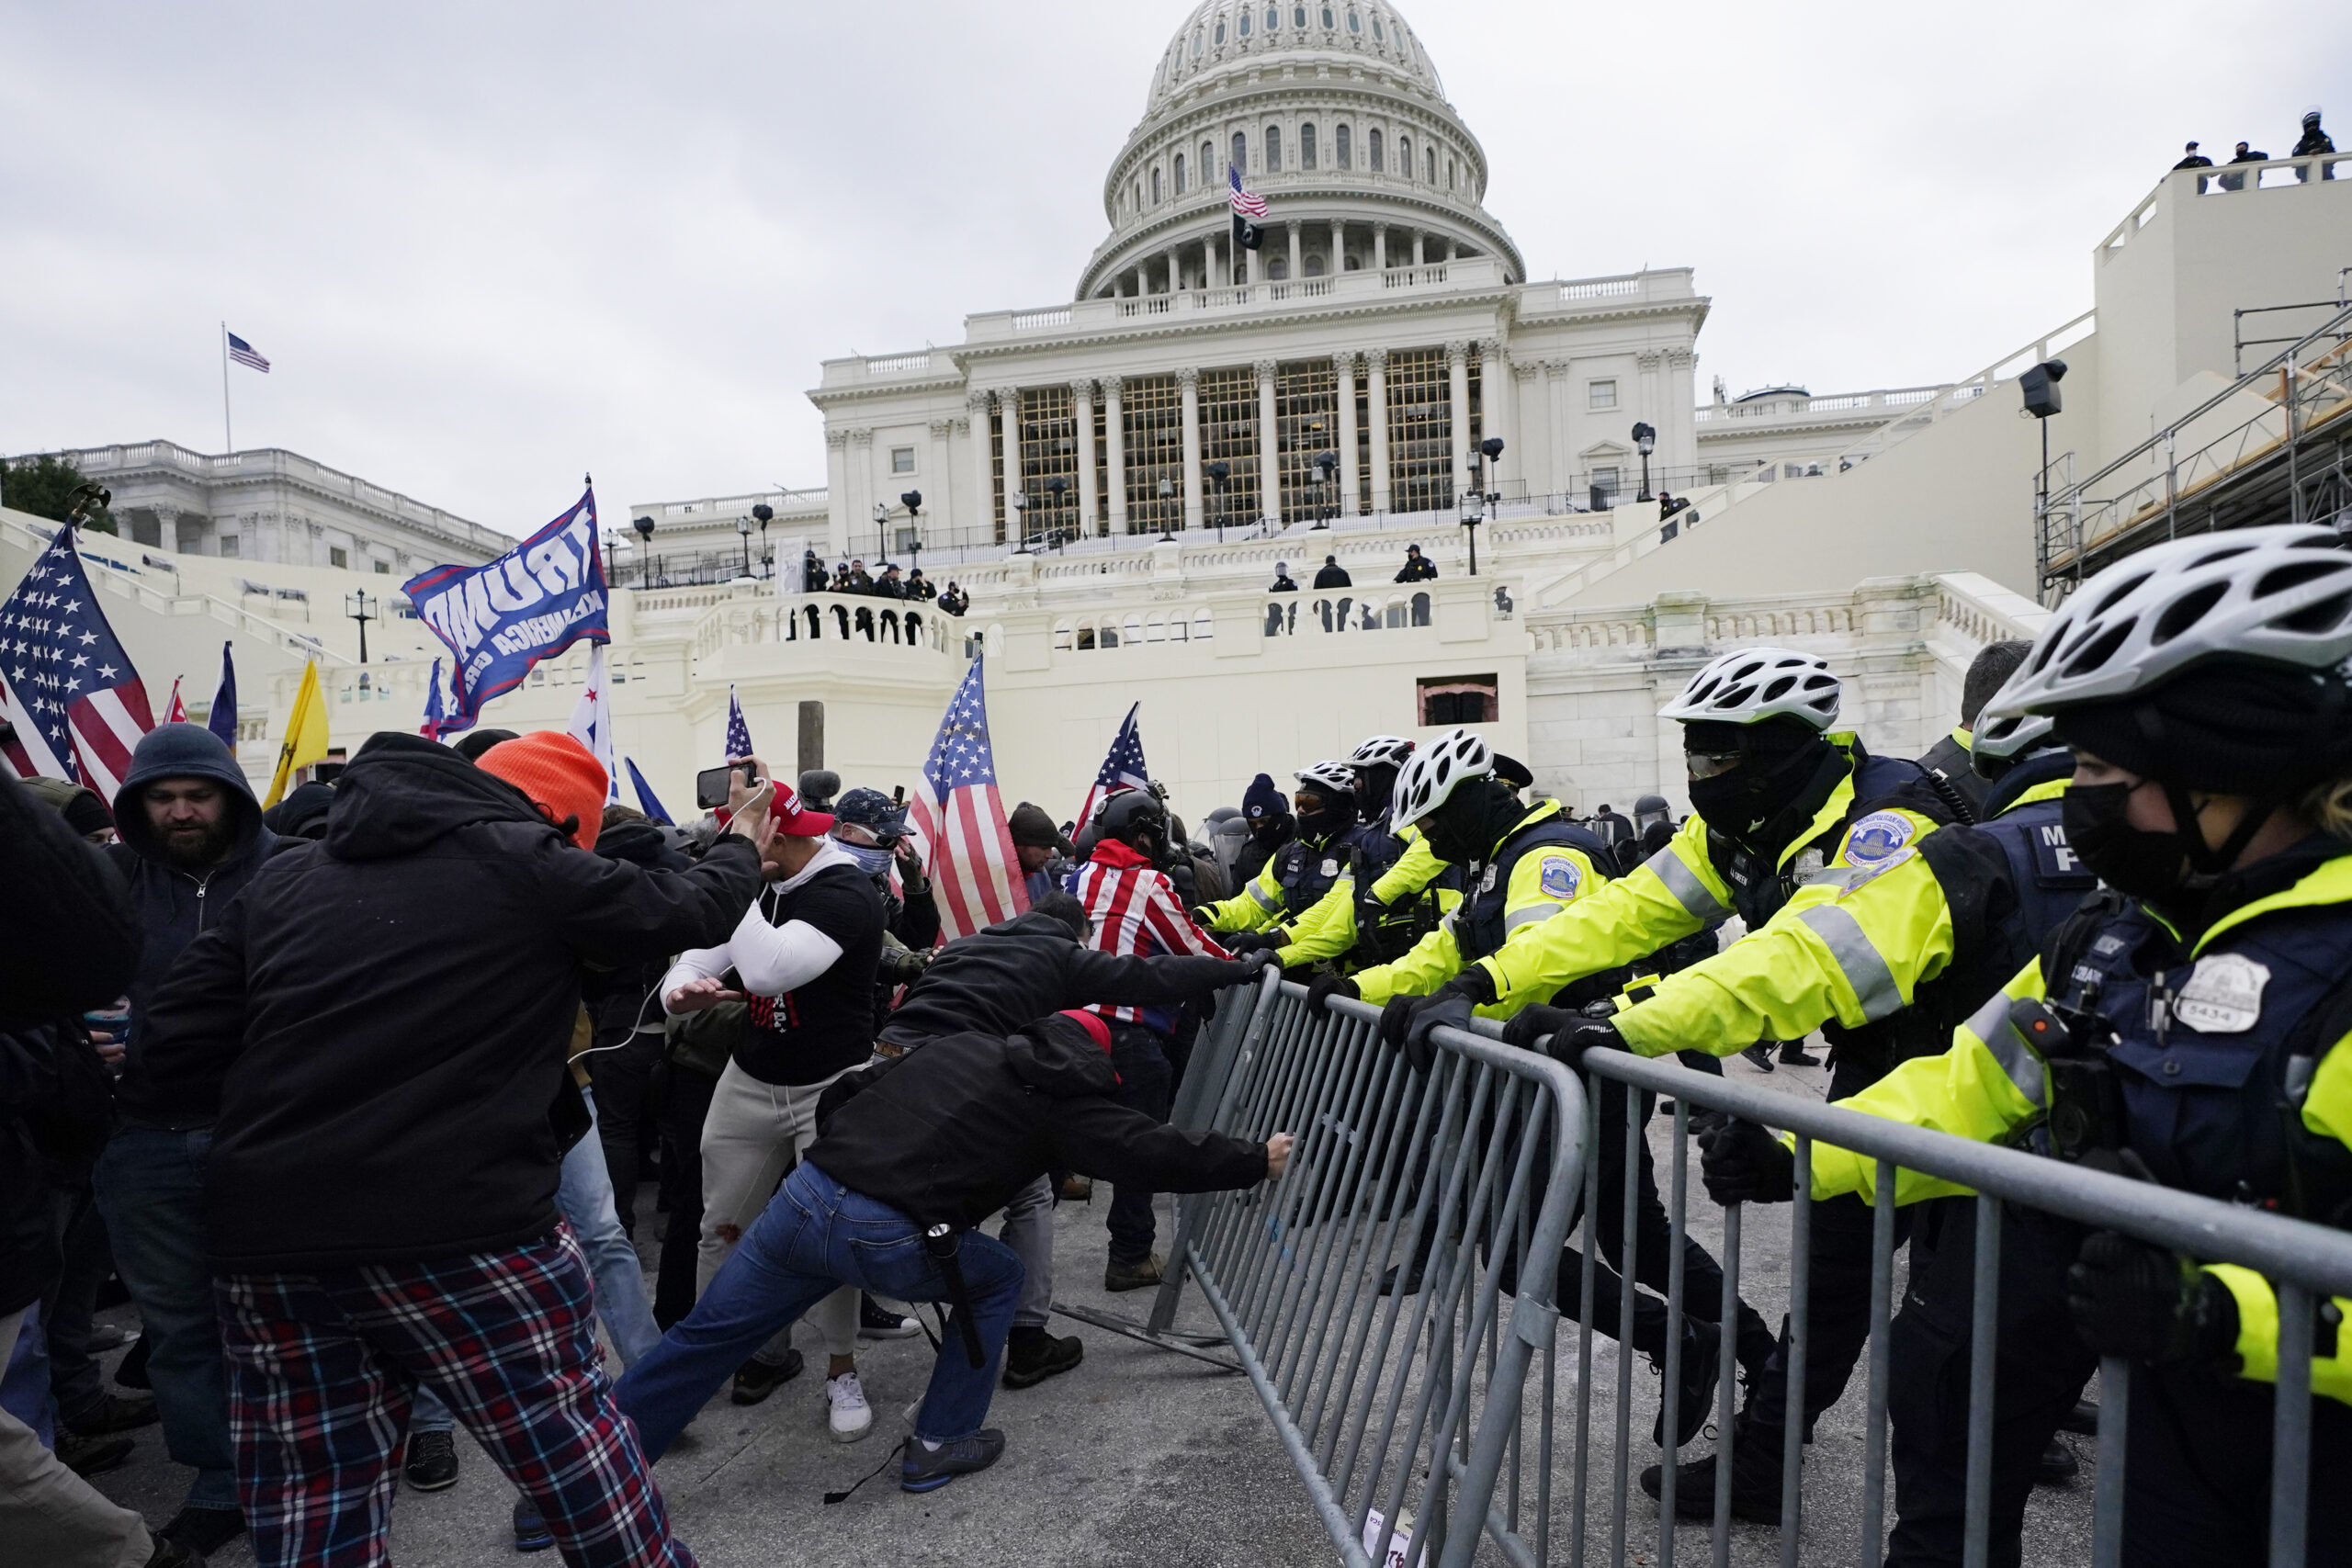 Capitol Police attempt to hold back rioters on Jan. 6, 2021